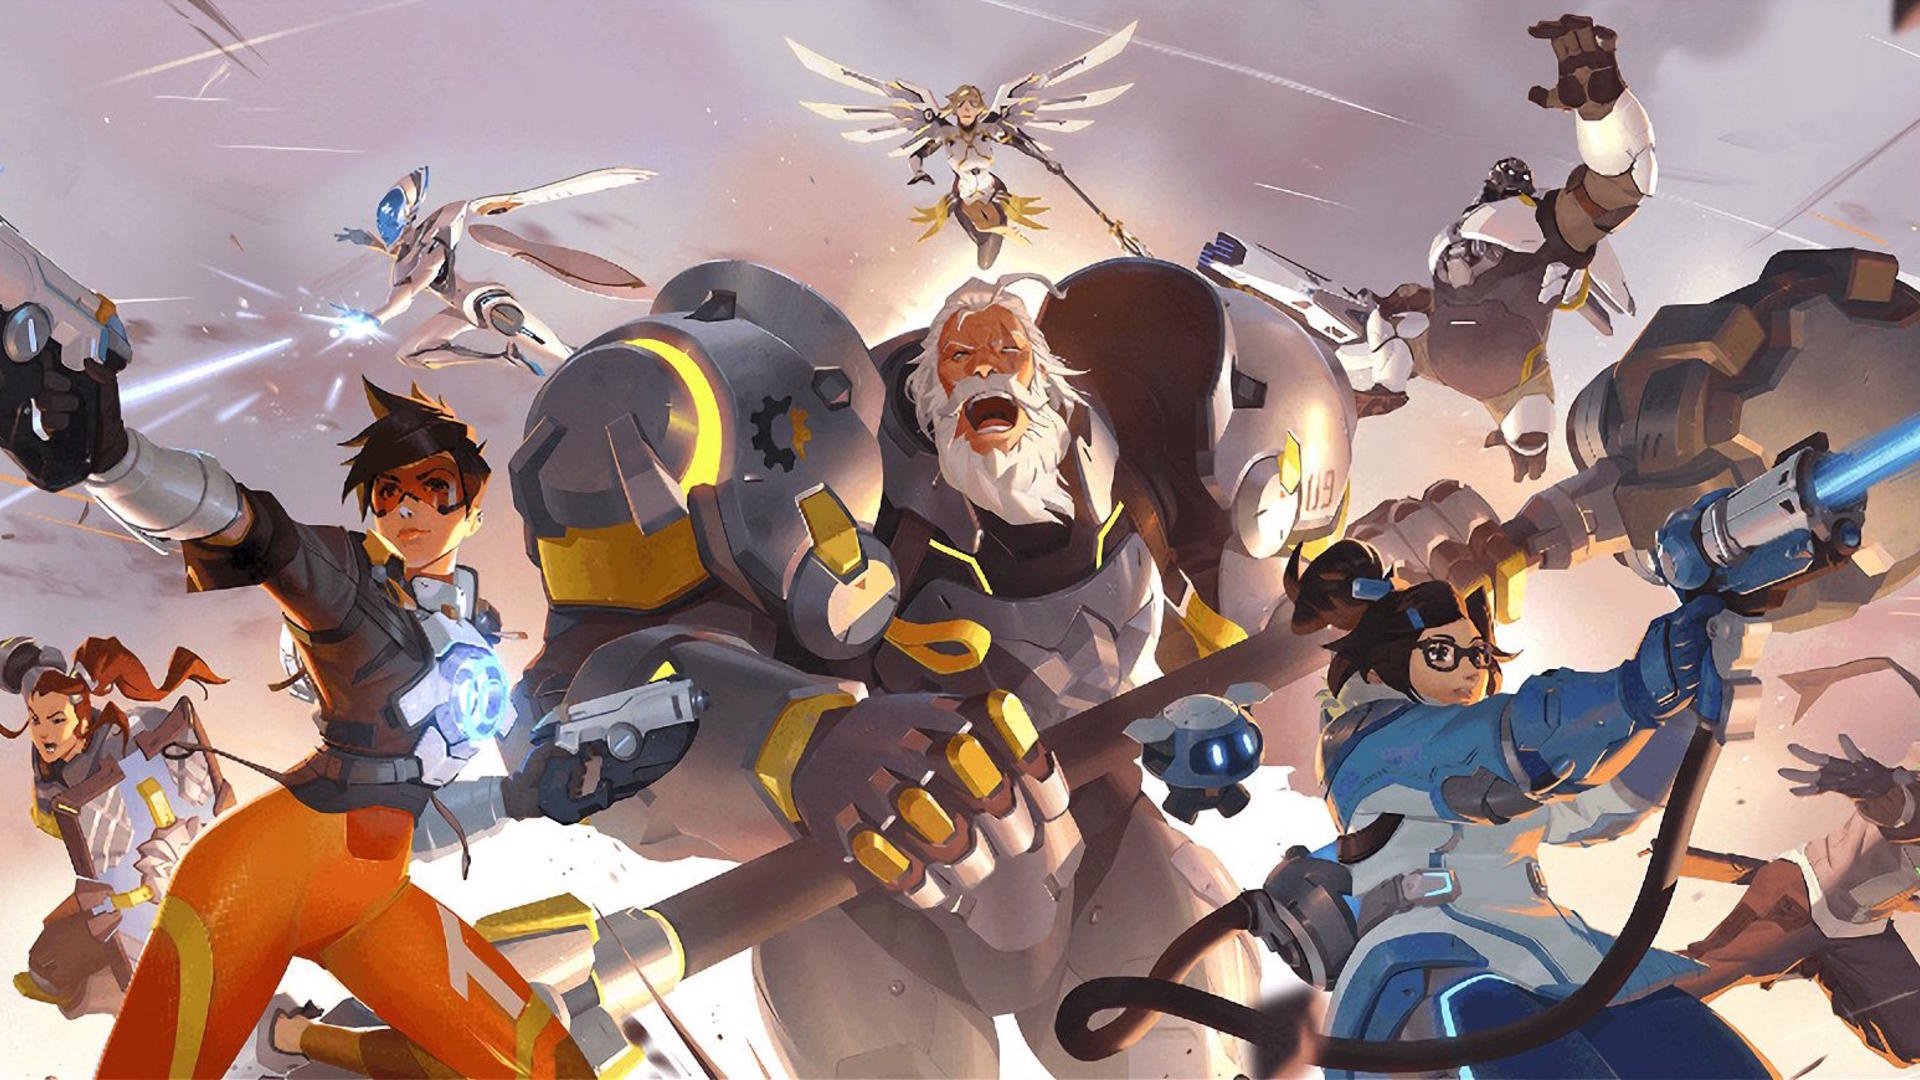 Overwatch 2 release date isn't coming for a while according to Blizzard